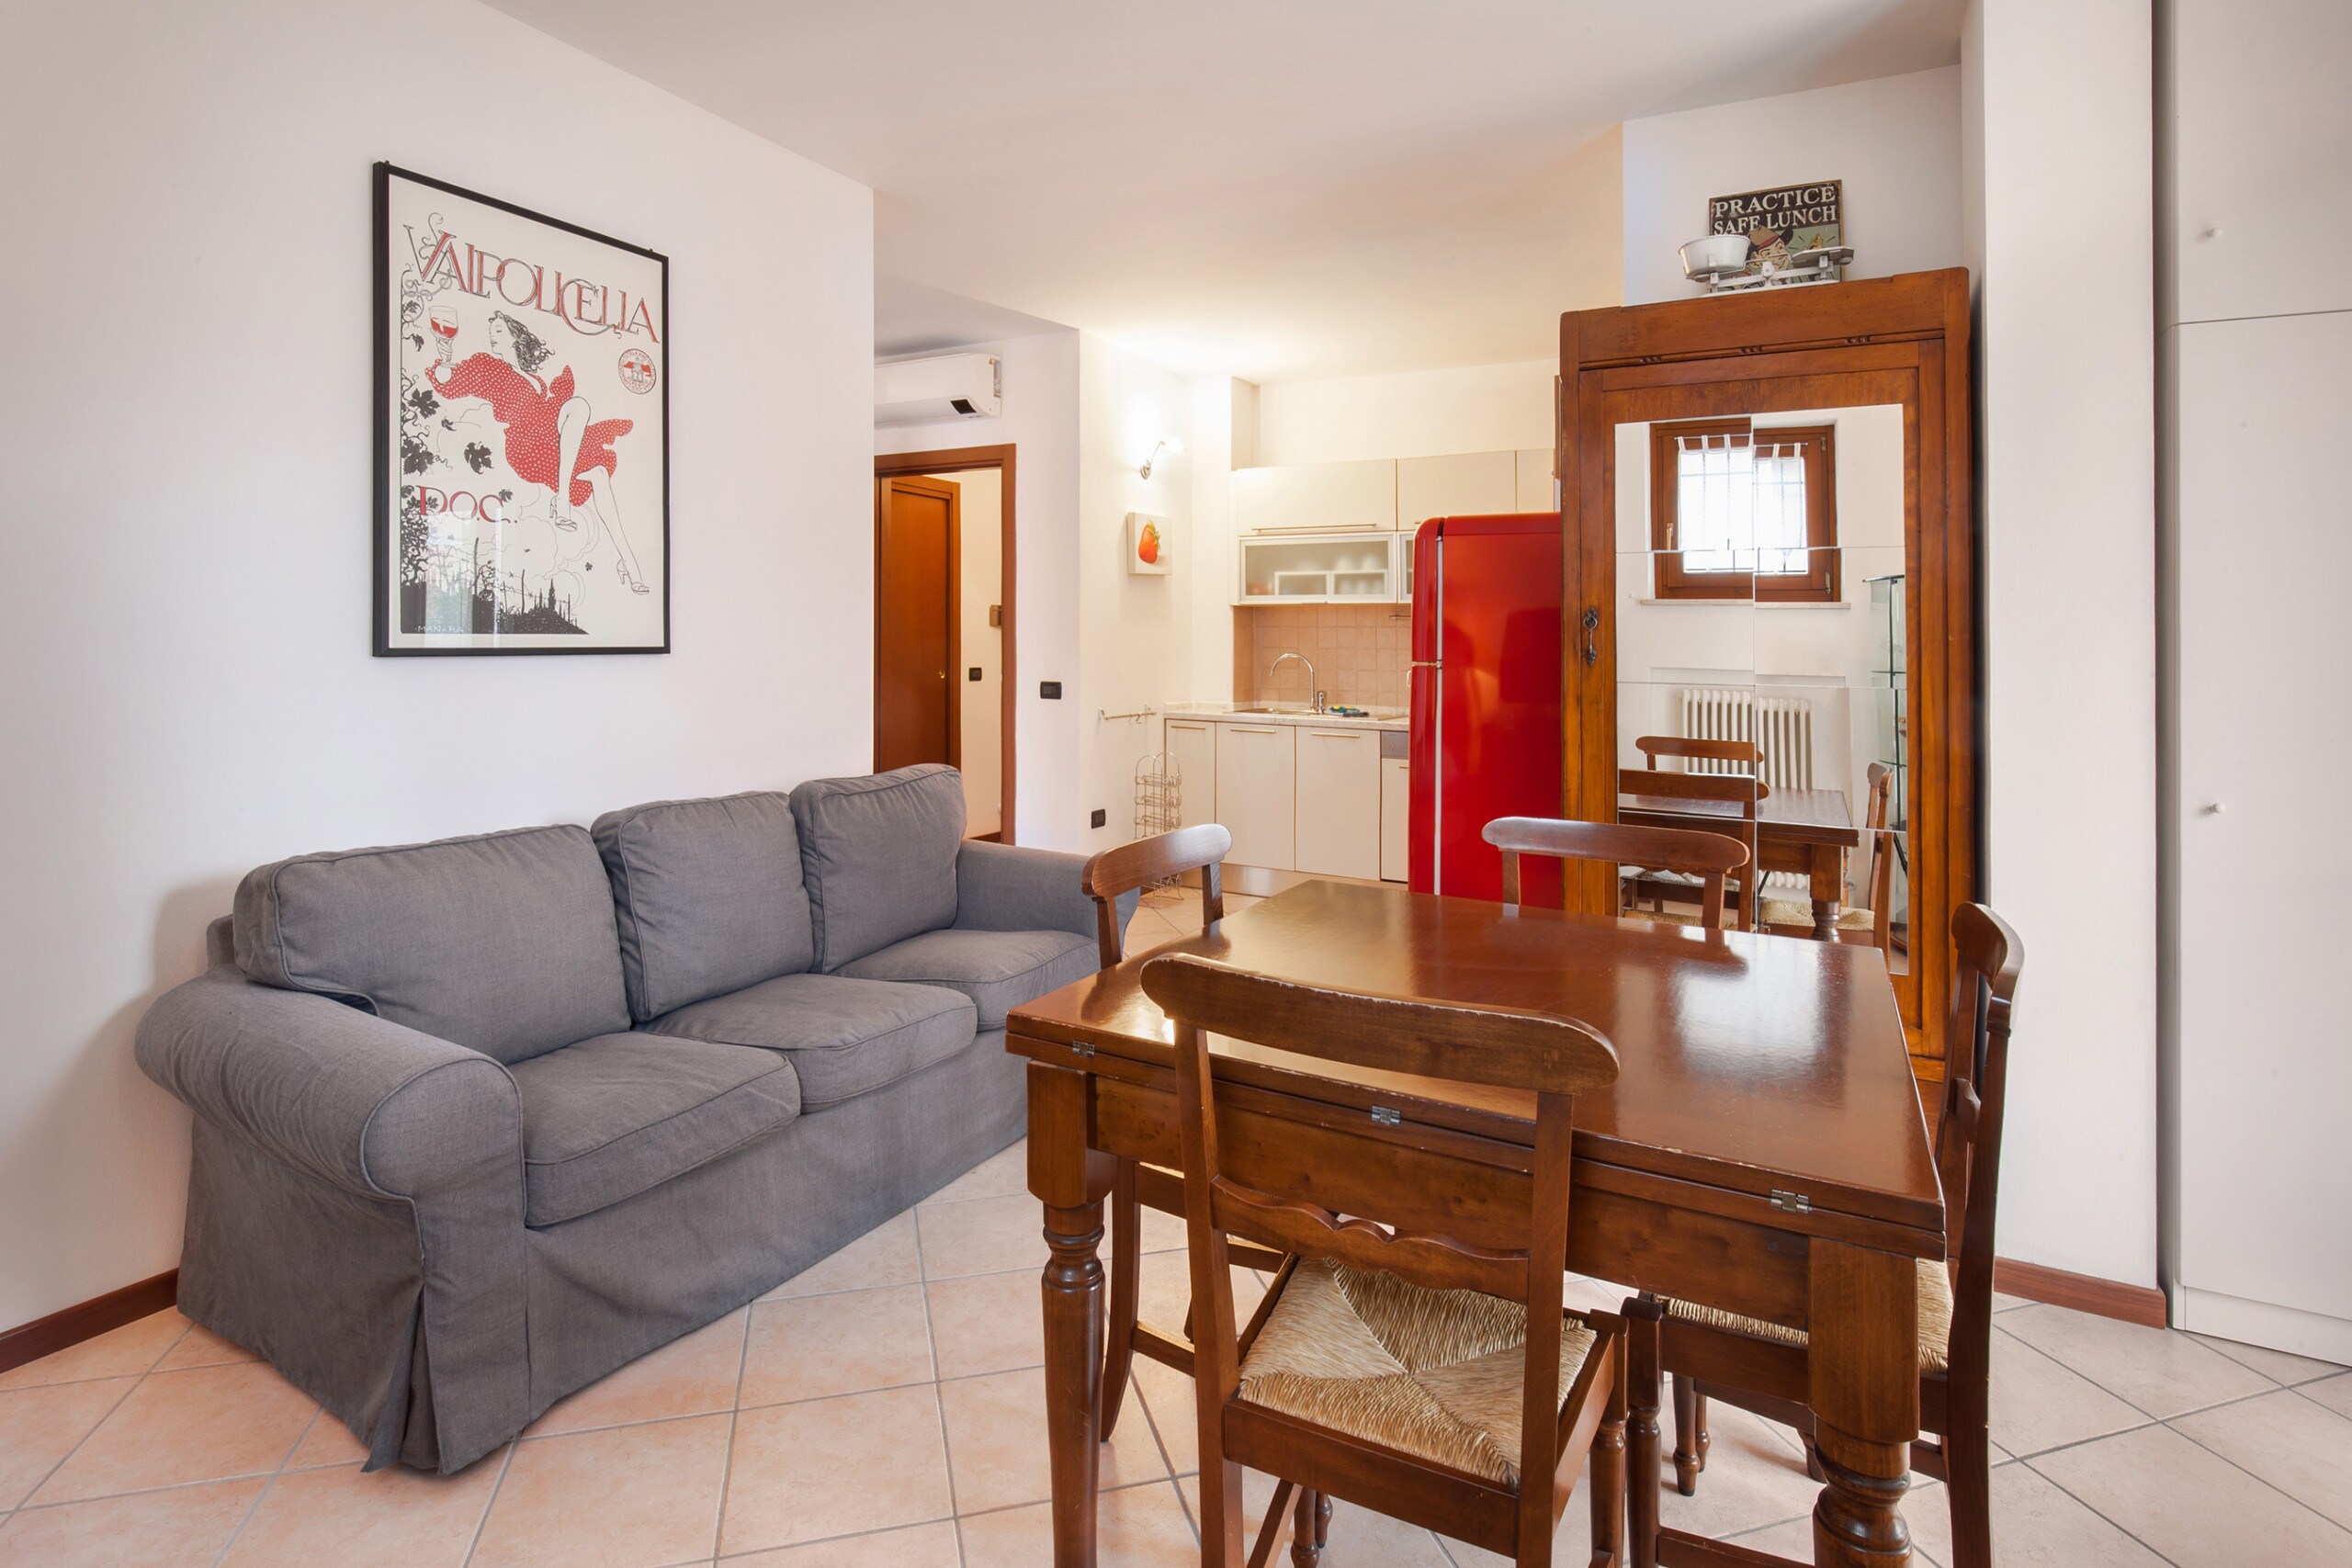 Property Image 2 - Apartment near the centre and harbour of Peschiera